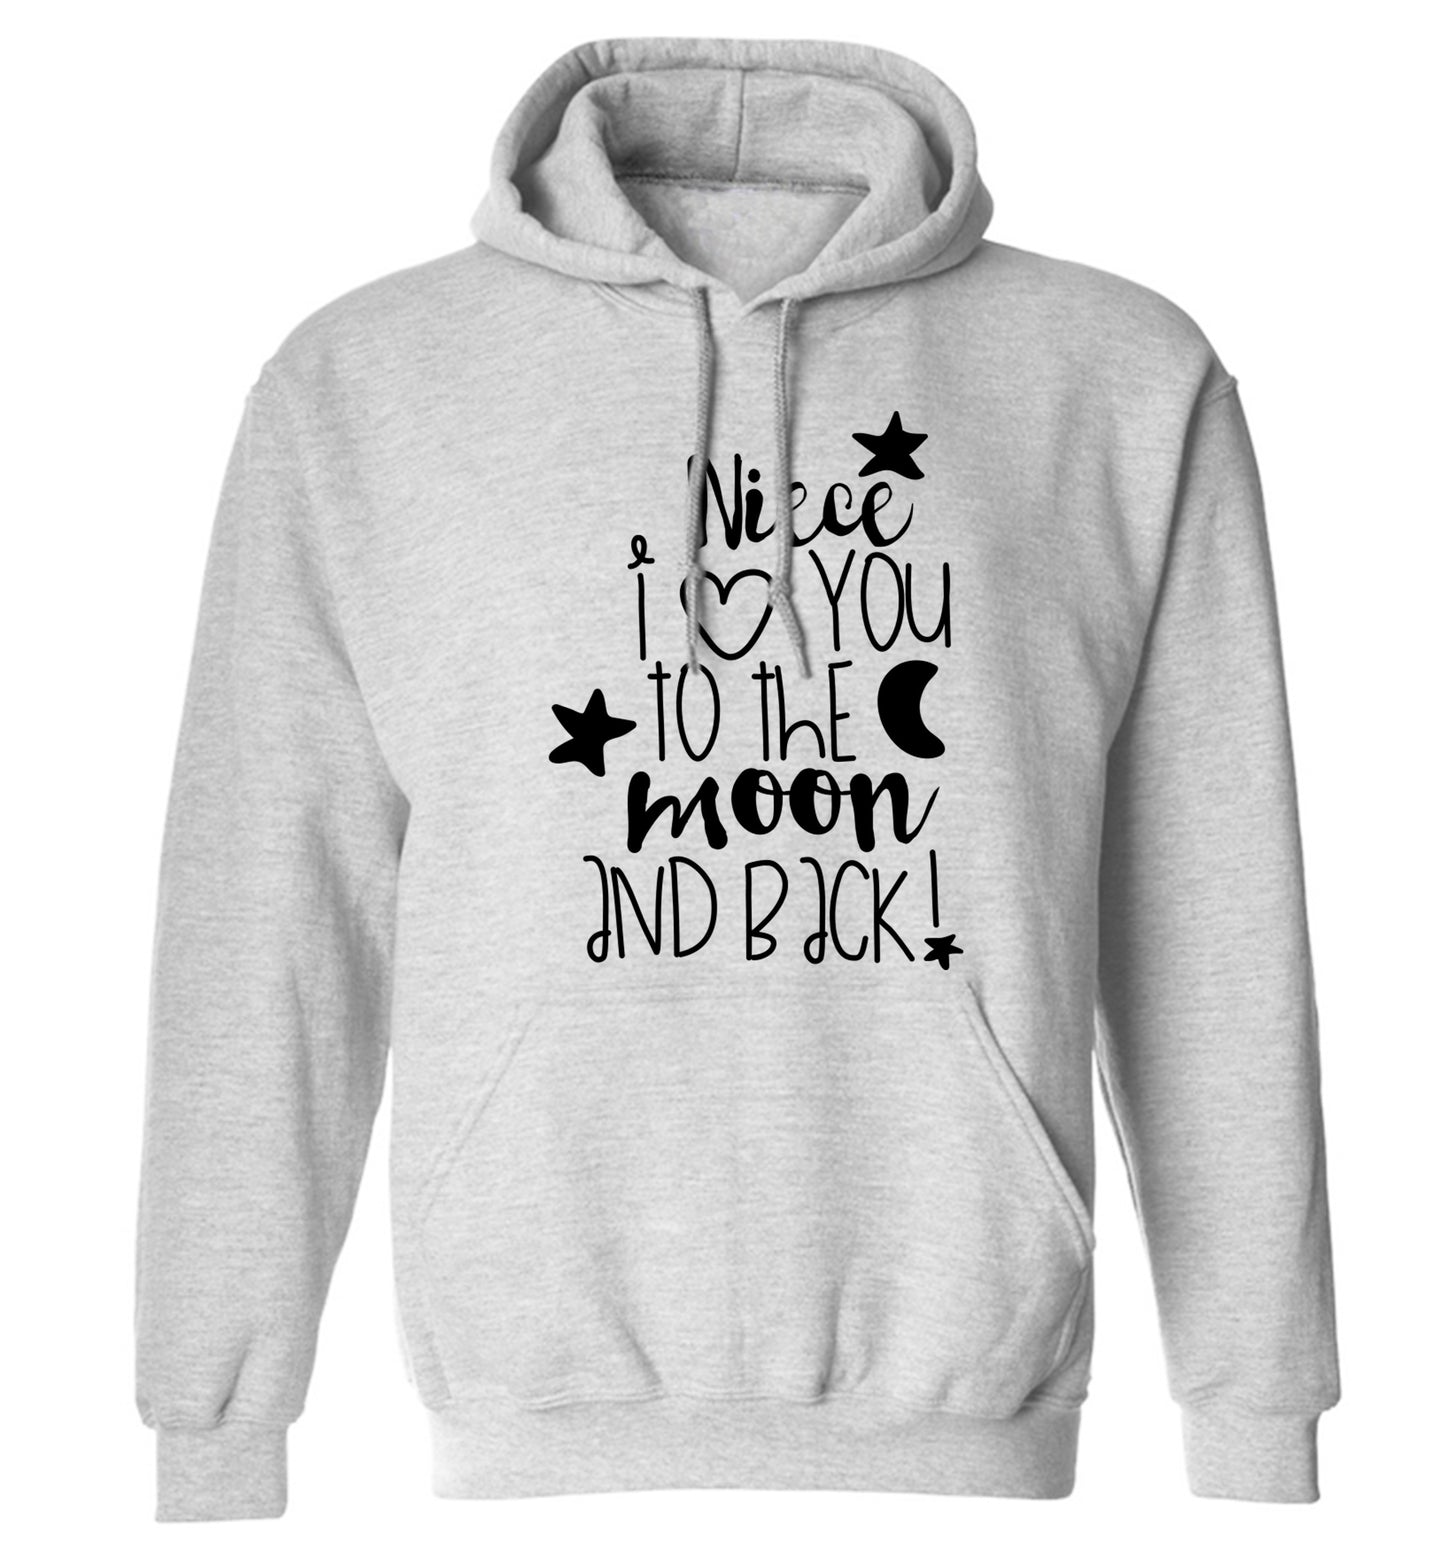 Niece I love you to the moon and back adults unisex grey hoodie 2XL